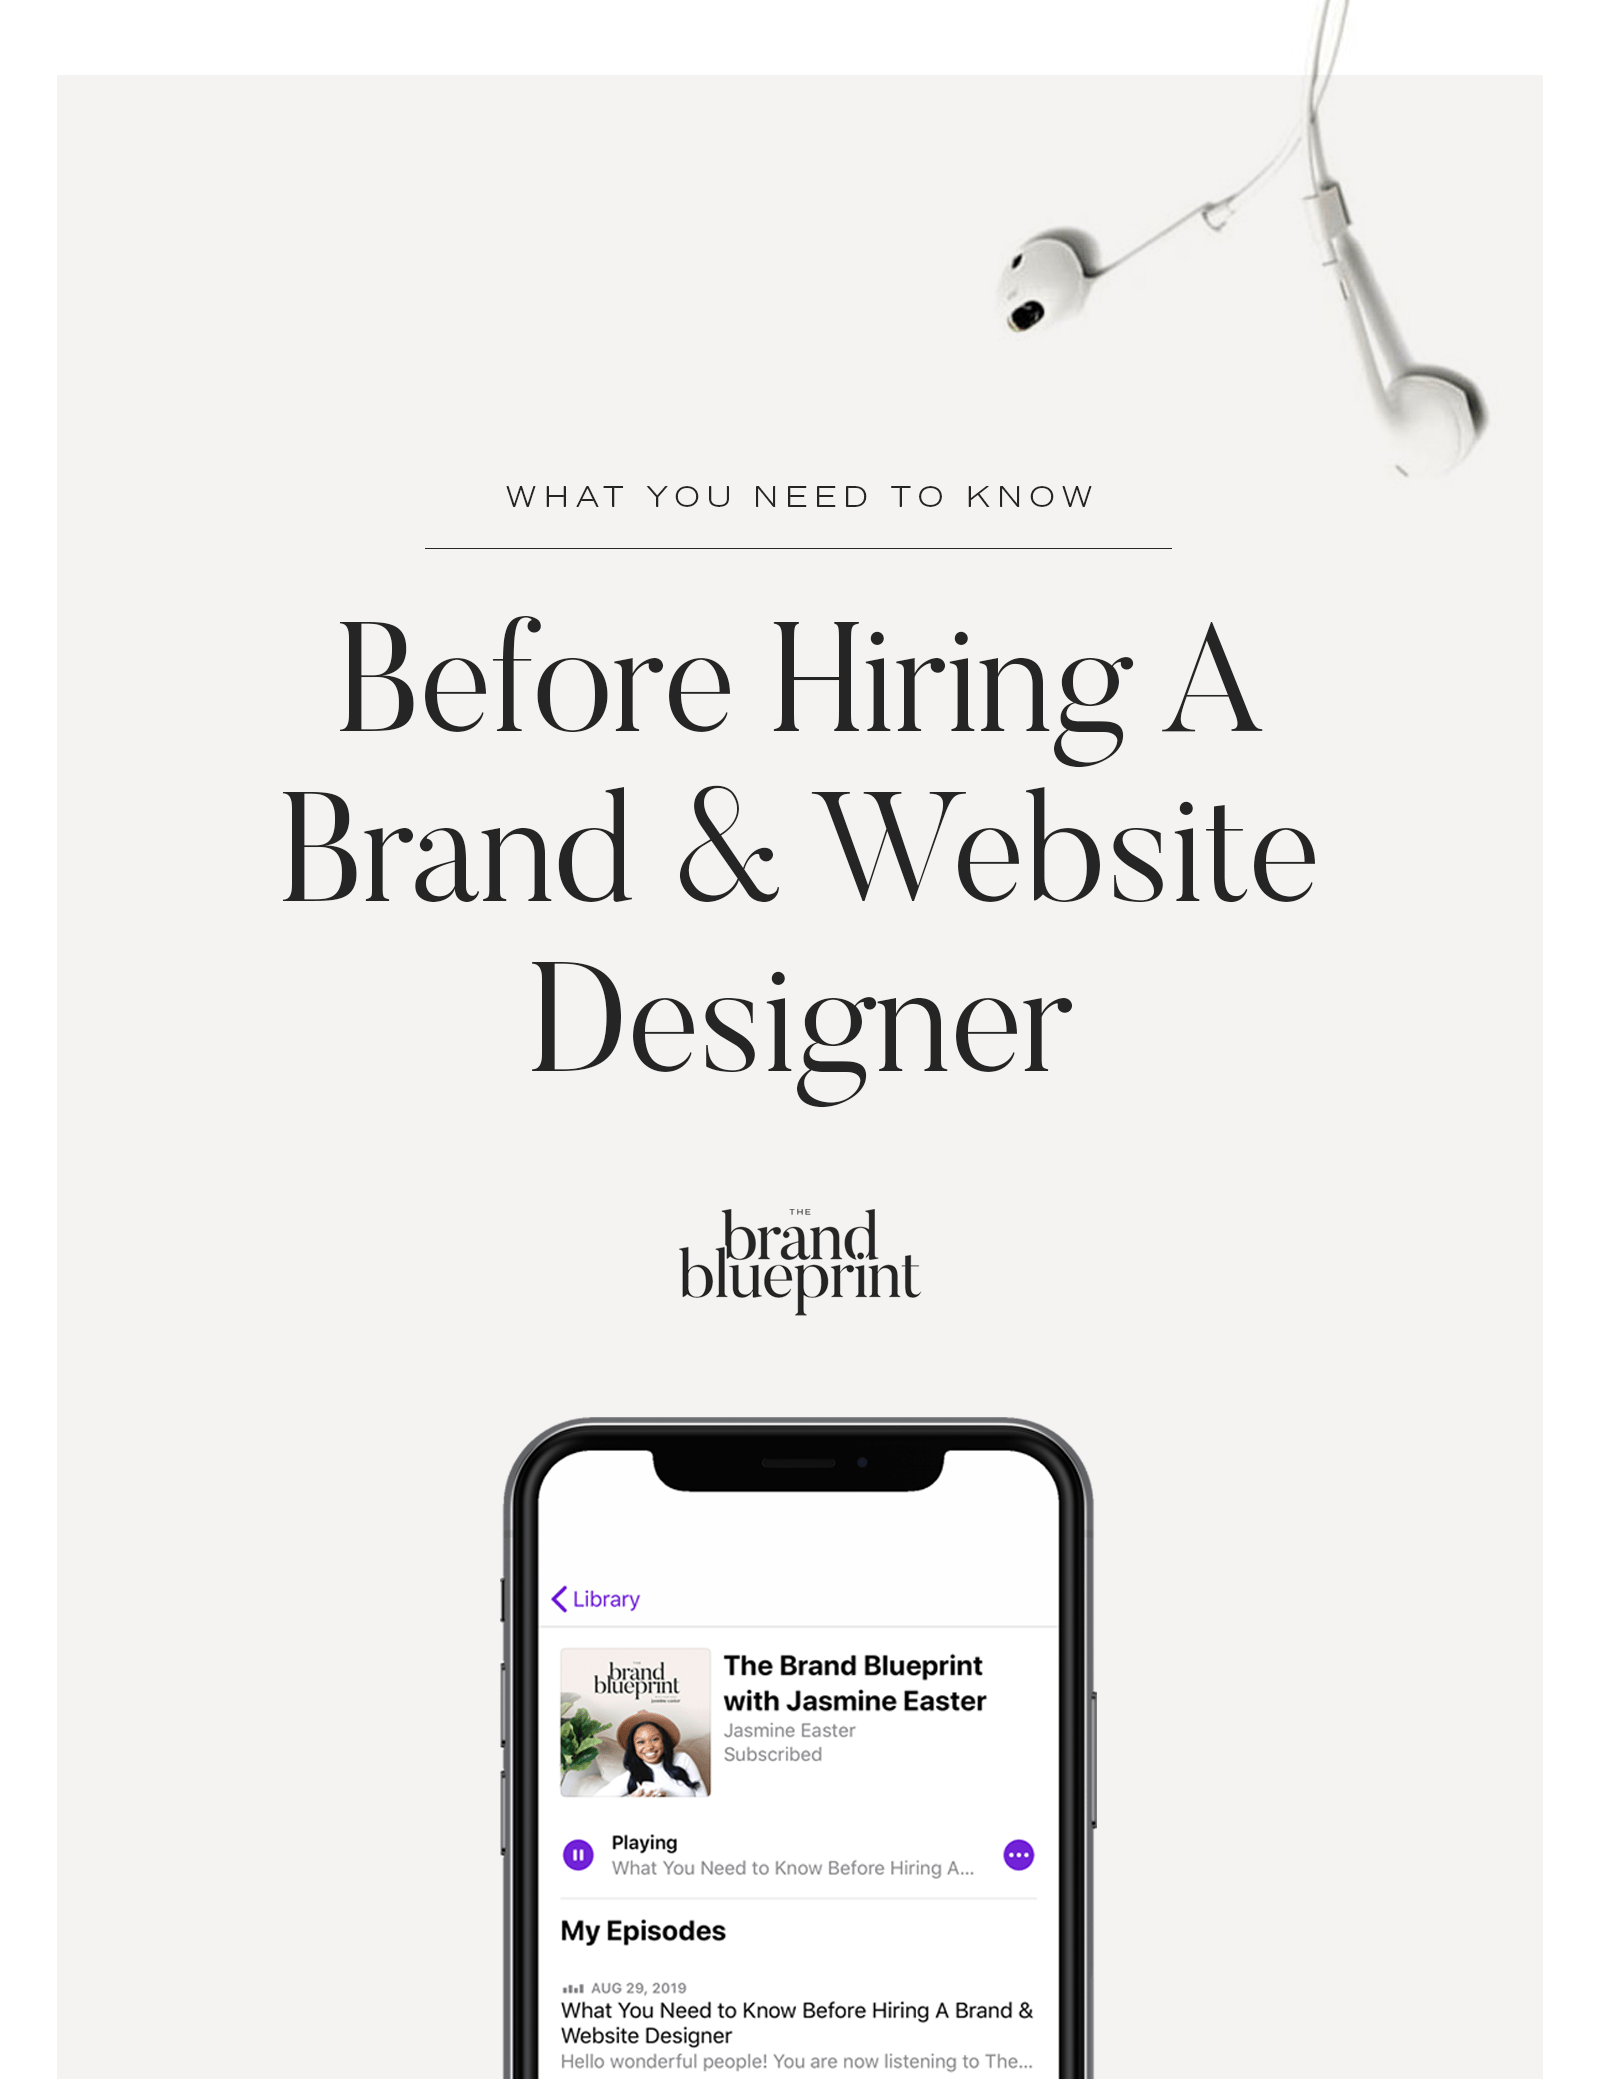 What You Need to Know Before Hiring A Brand & Website Designer